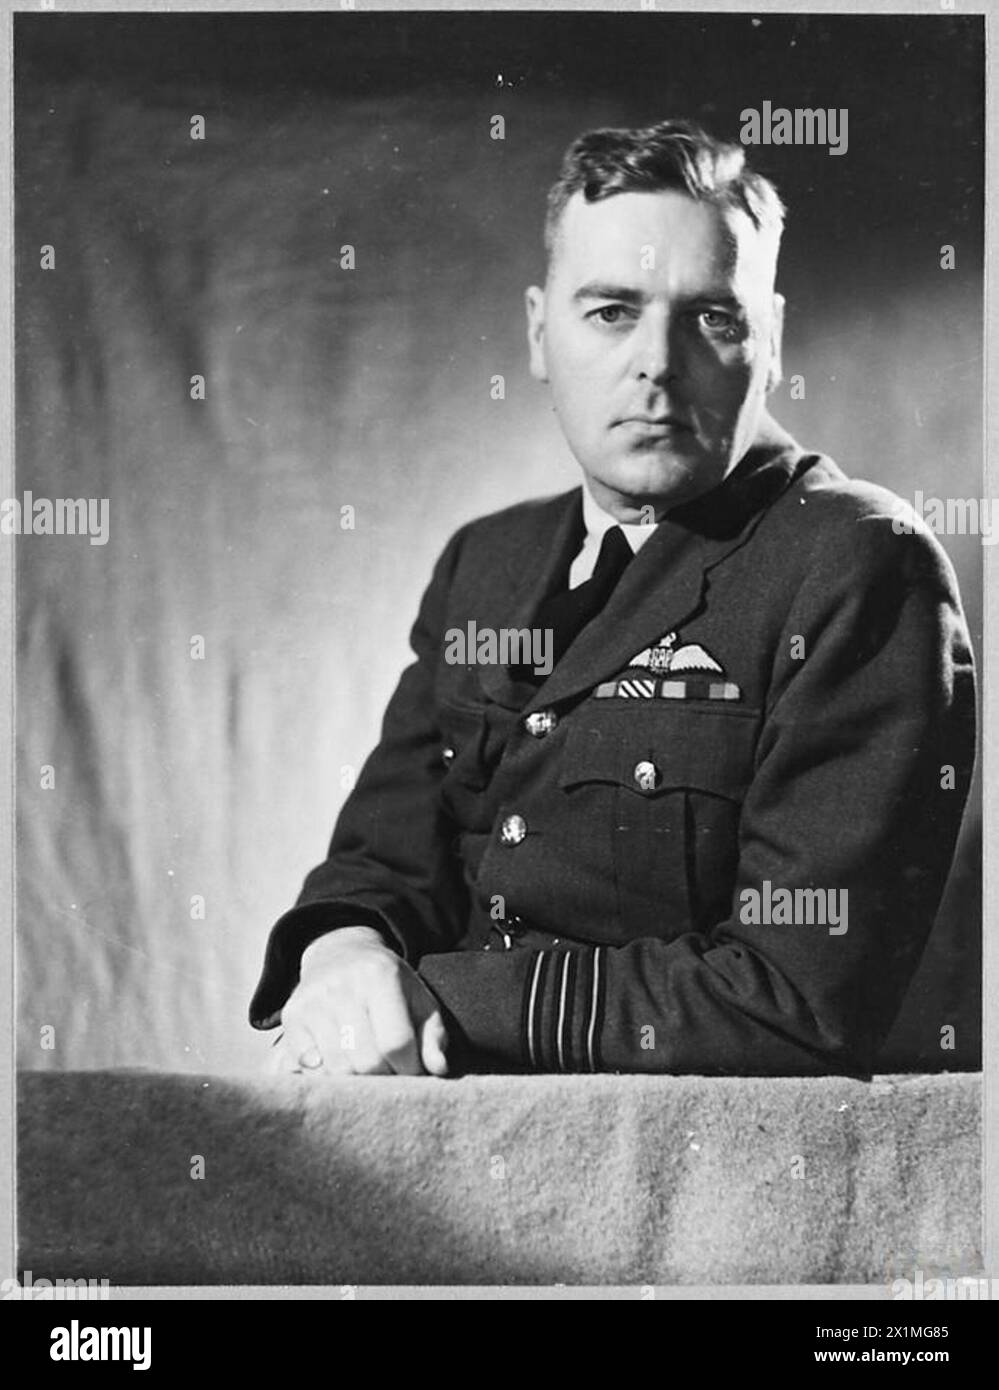 WING COMMANDER J.H. GILES, DSO., DFC. - Born in 1910 in Shanghai, Wing Commander JOHN HASSAL GILES was educated at Victoria High School, British Columbia, and was commissioned in the R.A.F. in 1936. He was awarded the D.F.C in August 1943, and won the D.S.O. in March 1945. On one occasion when attacking a target at Essen, Wing commander Giles's aircraft was coned in searchlights for nine minutes and damaged by anti-aircraft fire. 'He has at all times displayed a high degree of courage and determination, and has set a fine example to the younger captains' stated a ciation. Picture issued 1945, Stock Photo